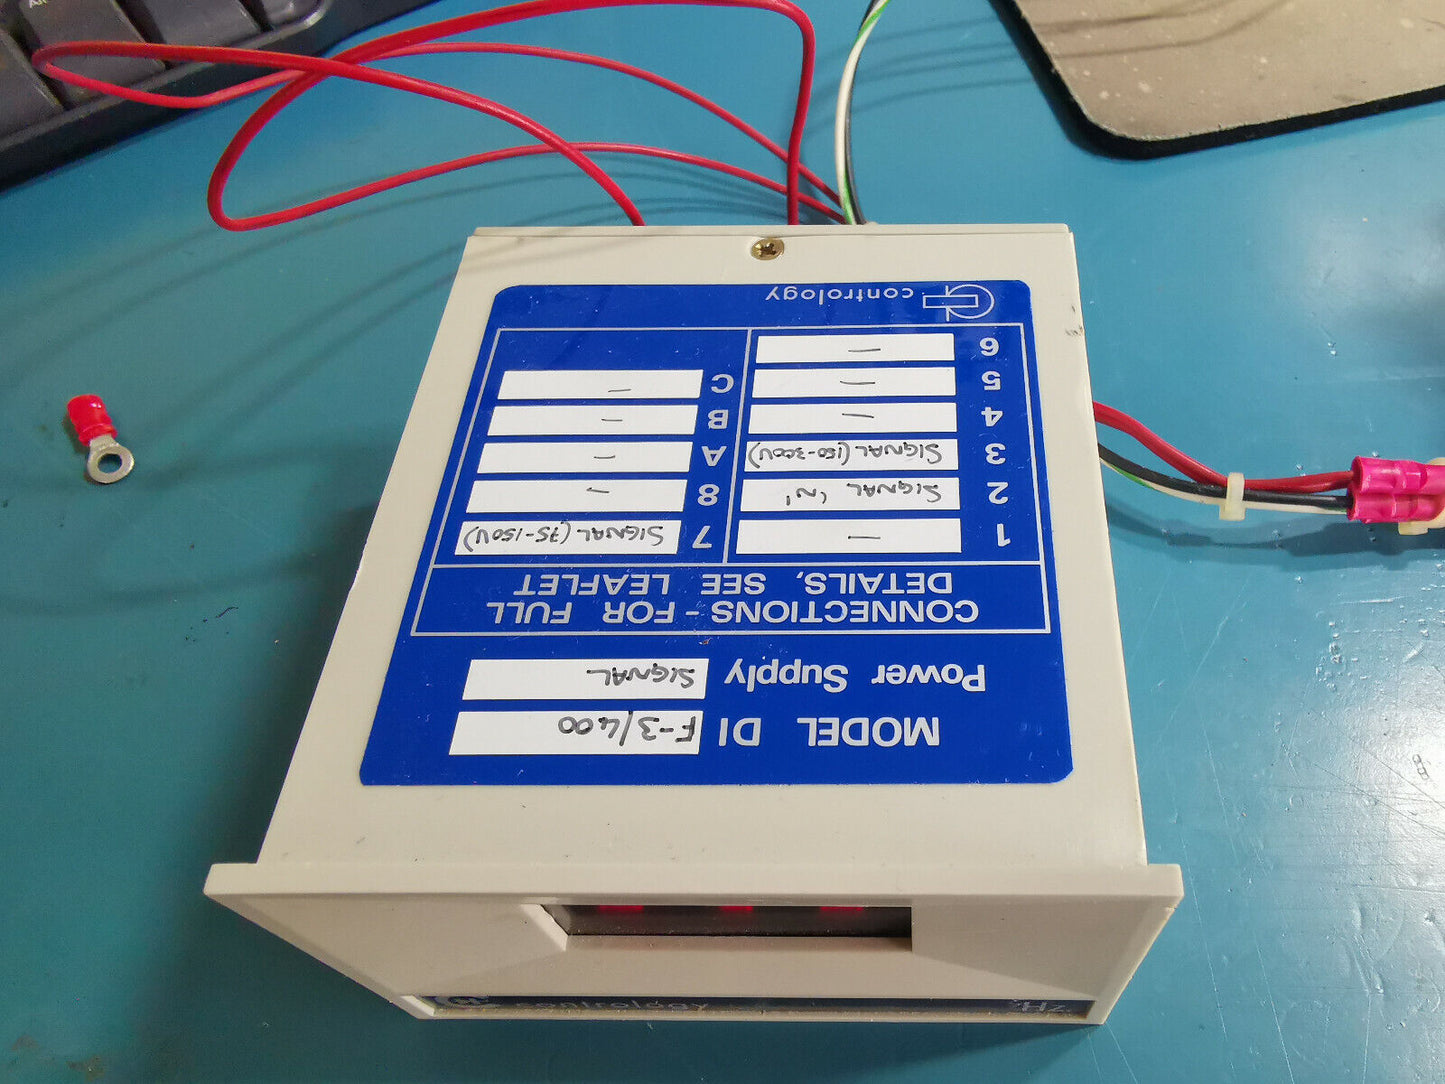 Digital panel Meter For Line frequency 50Hz To 400Hz